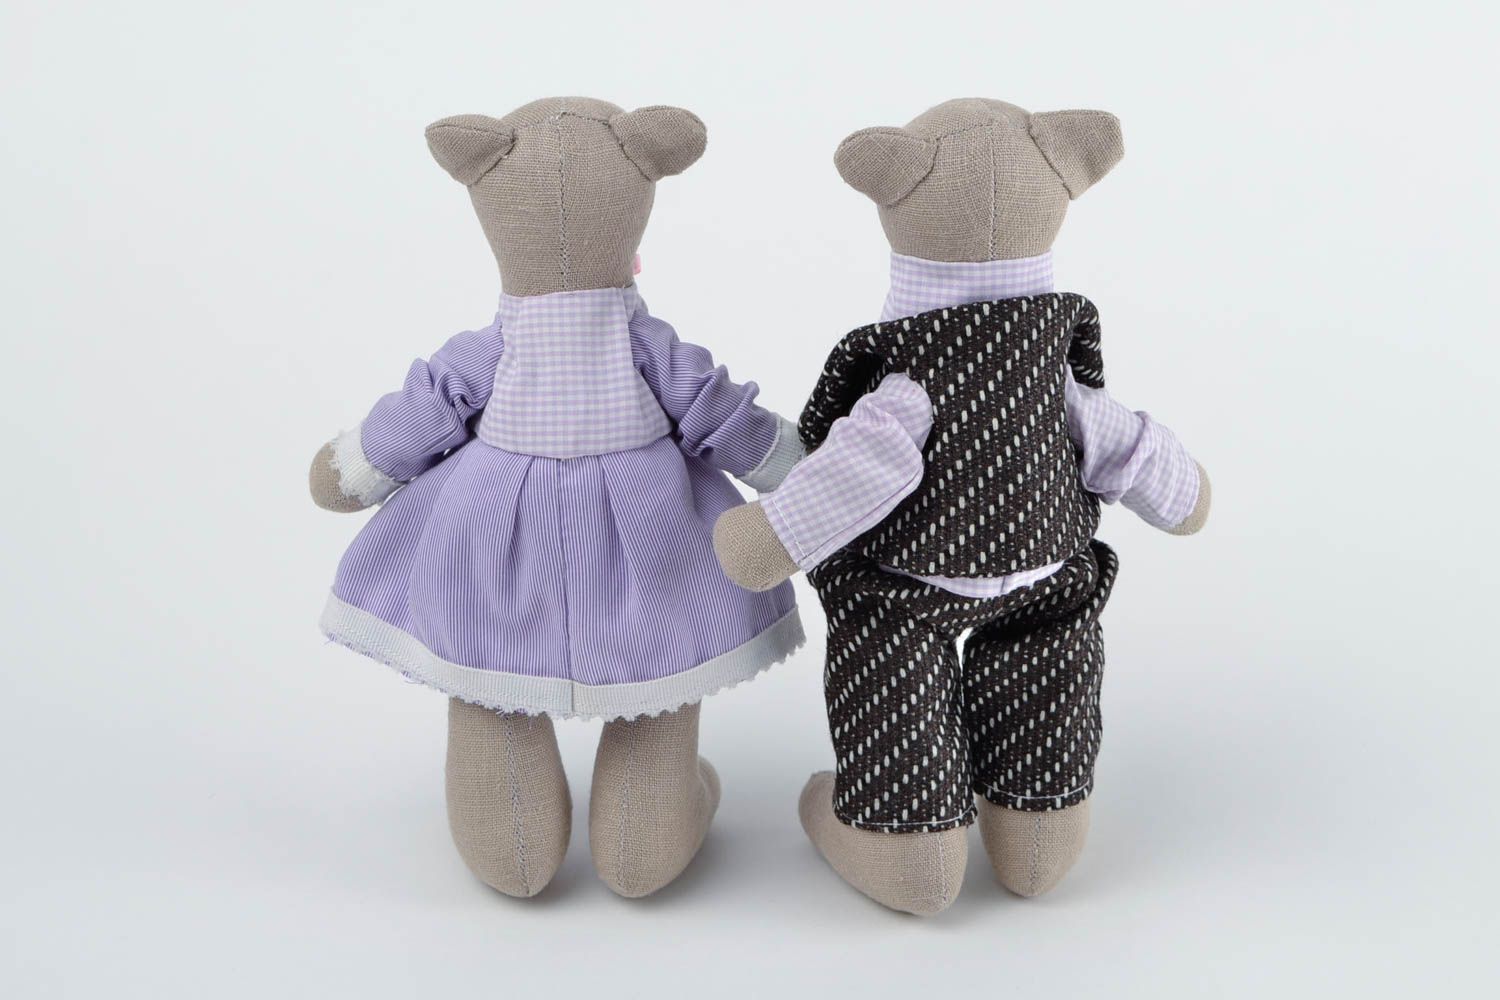 Toy bears handmade toys cuddly toys homemade home decor gift ideas for kids photo 5